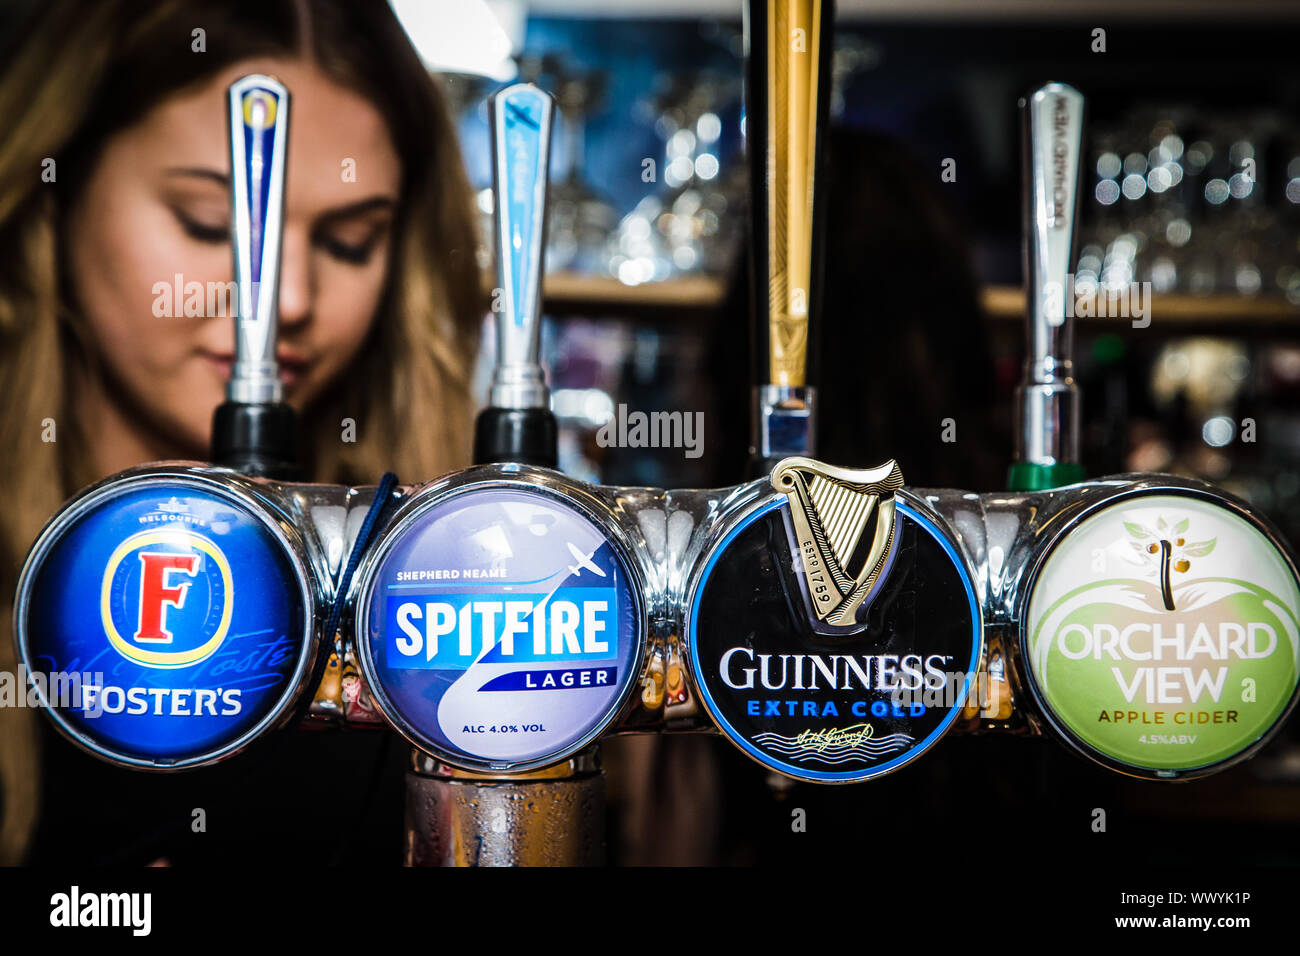 A Barmaid stands behind Beer and Cider pumps in a club. Stock Photo